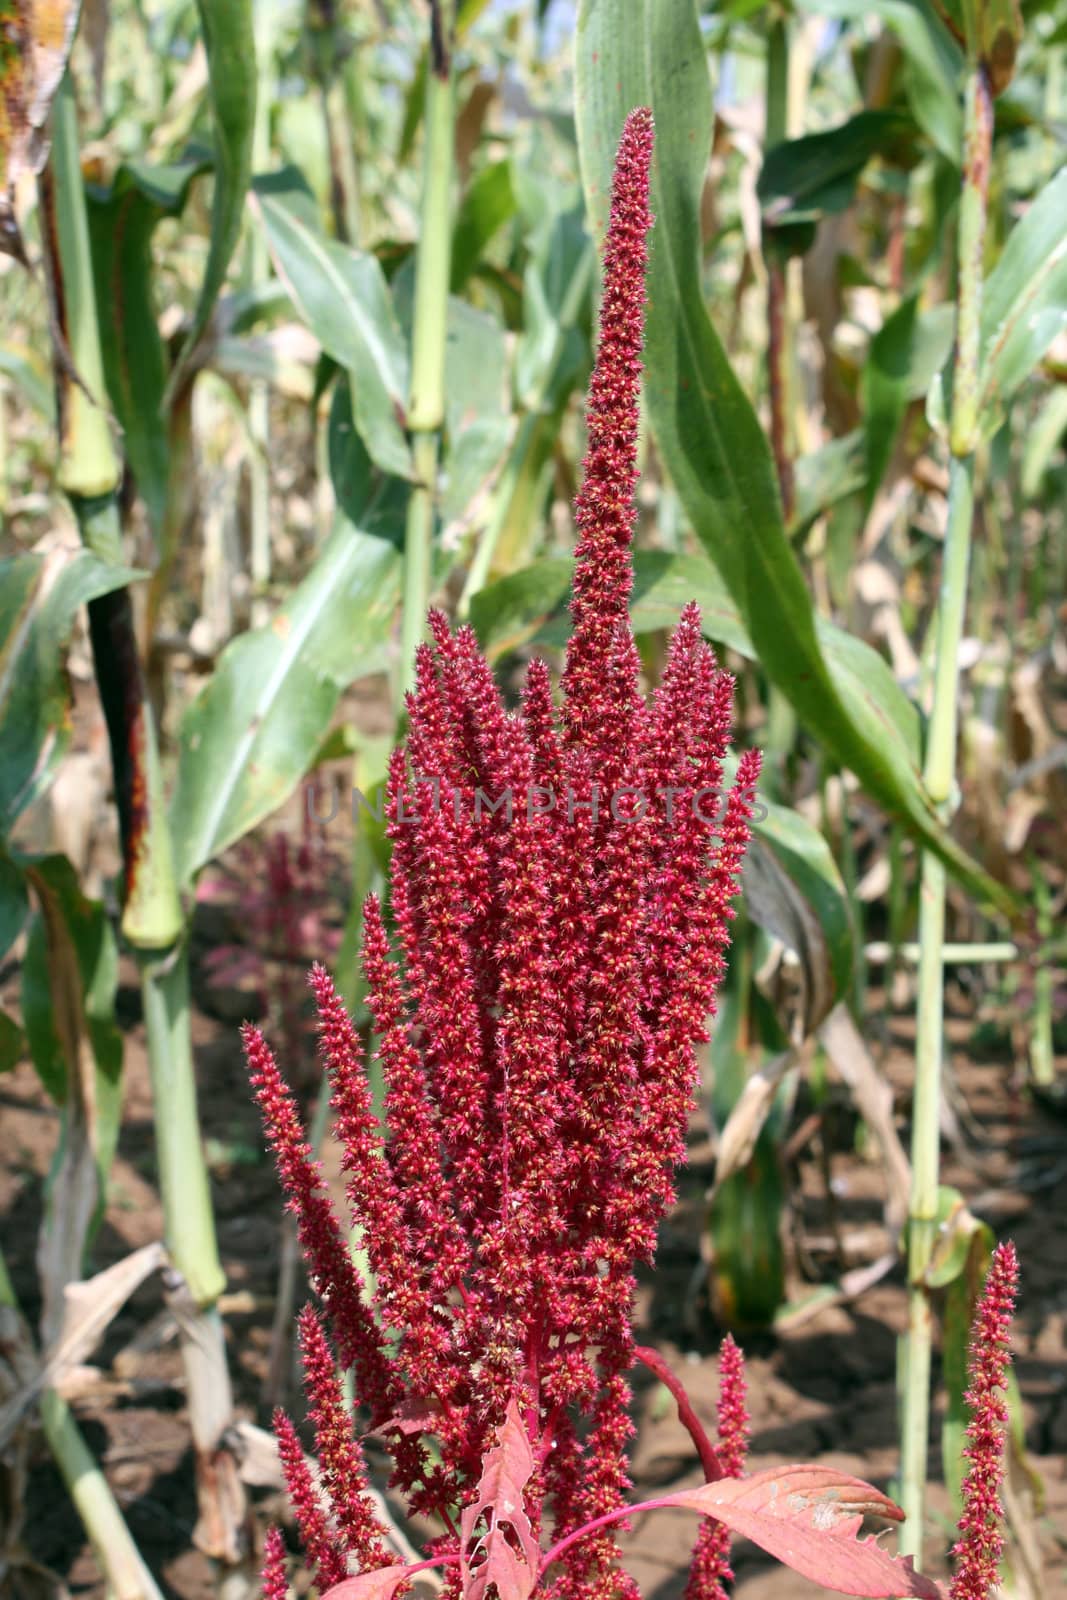 A closeup view of Amaranthus plant commonly known as amaranth.